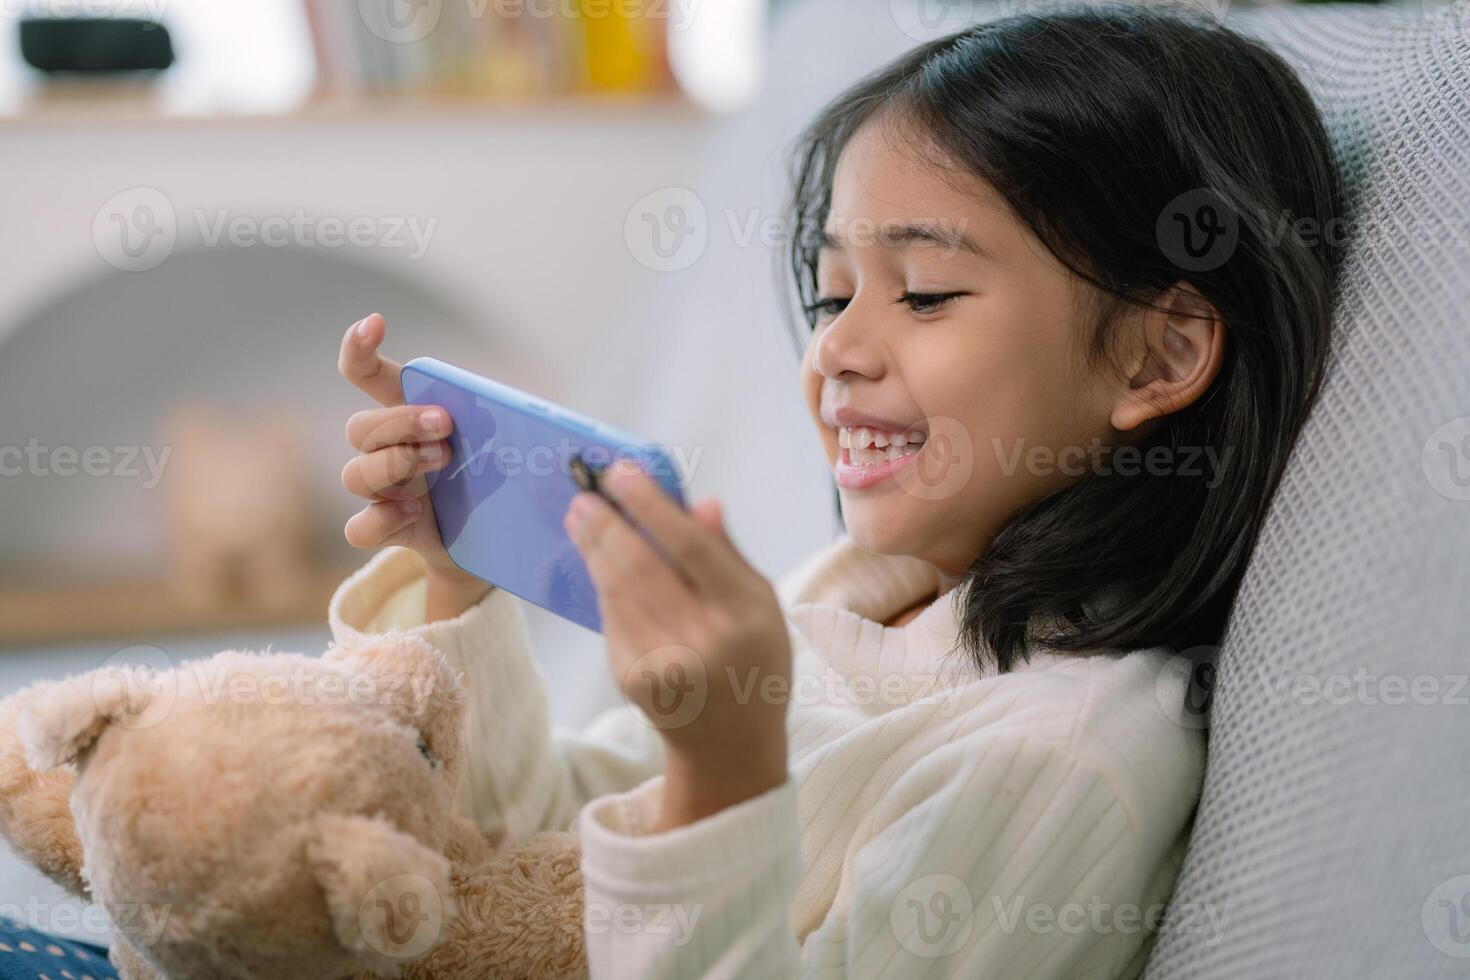 A young girl is sitting on a couch and playing a video game on her phone photo